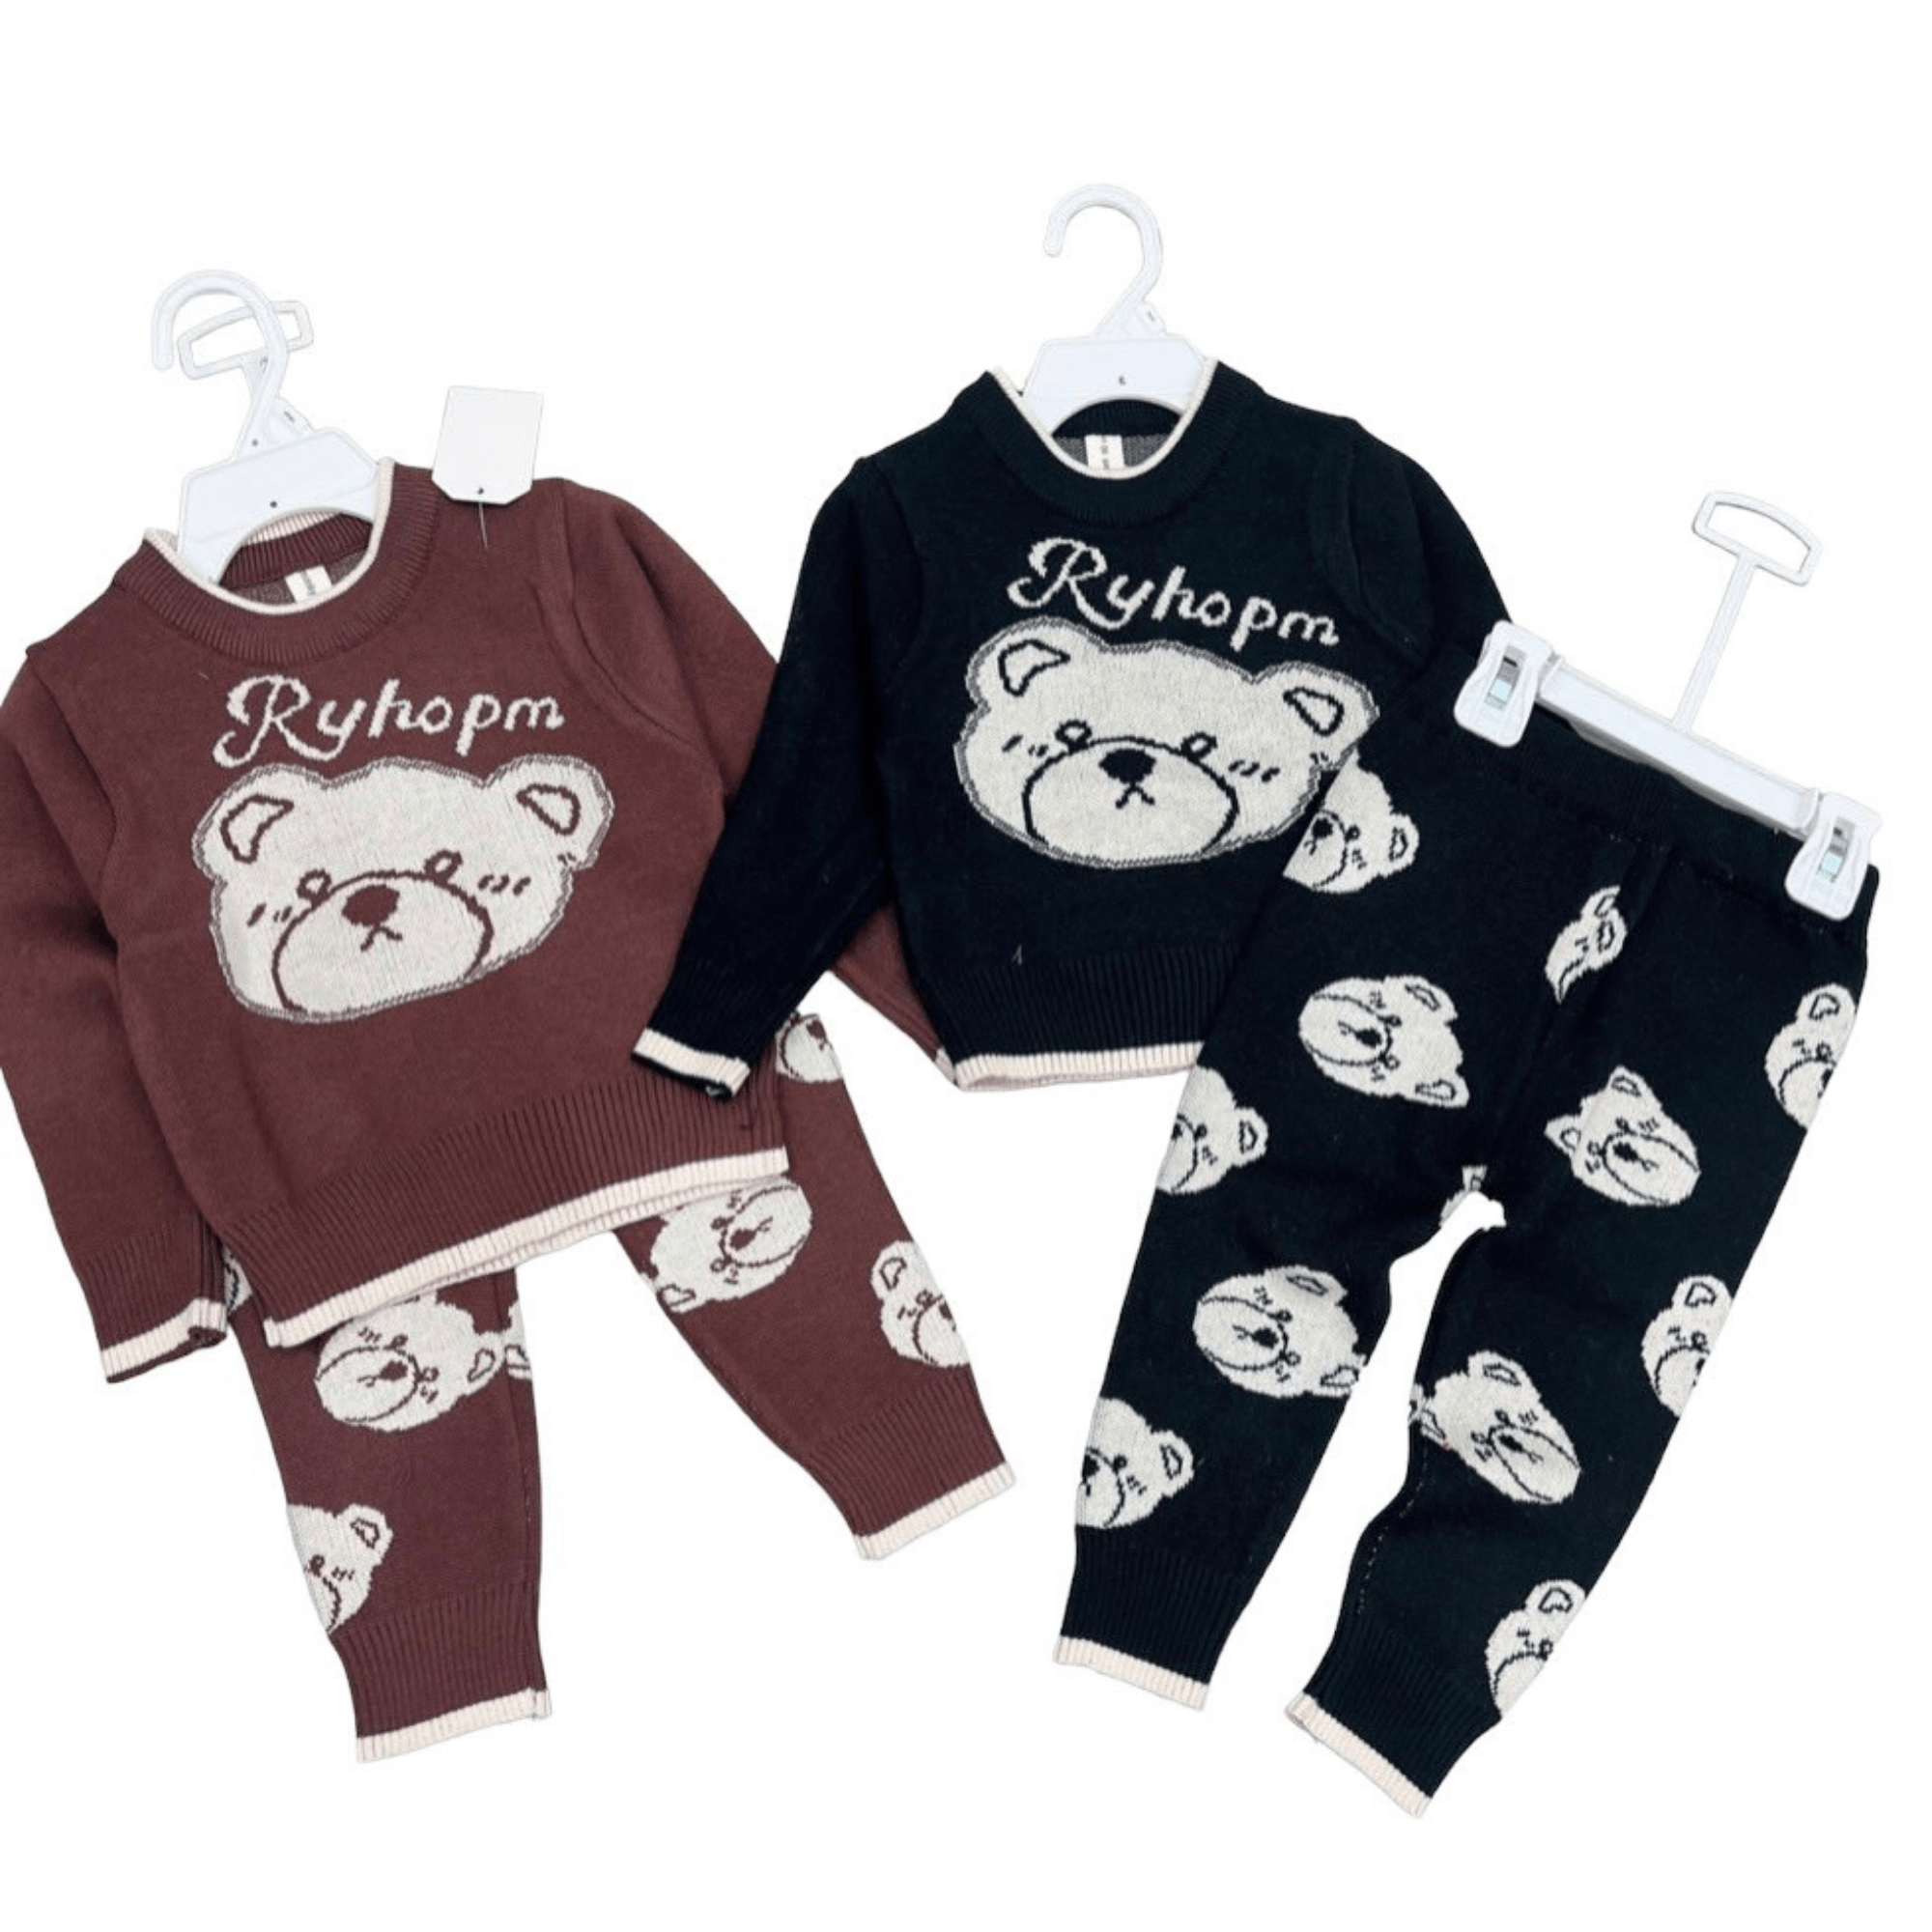 Winter Clothes For Kids Comfortable 100% Wool Oem New Fashion Each One In Opp Bag Made In Vietnam Manufacturer